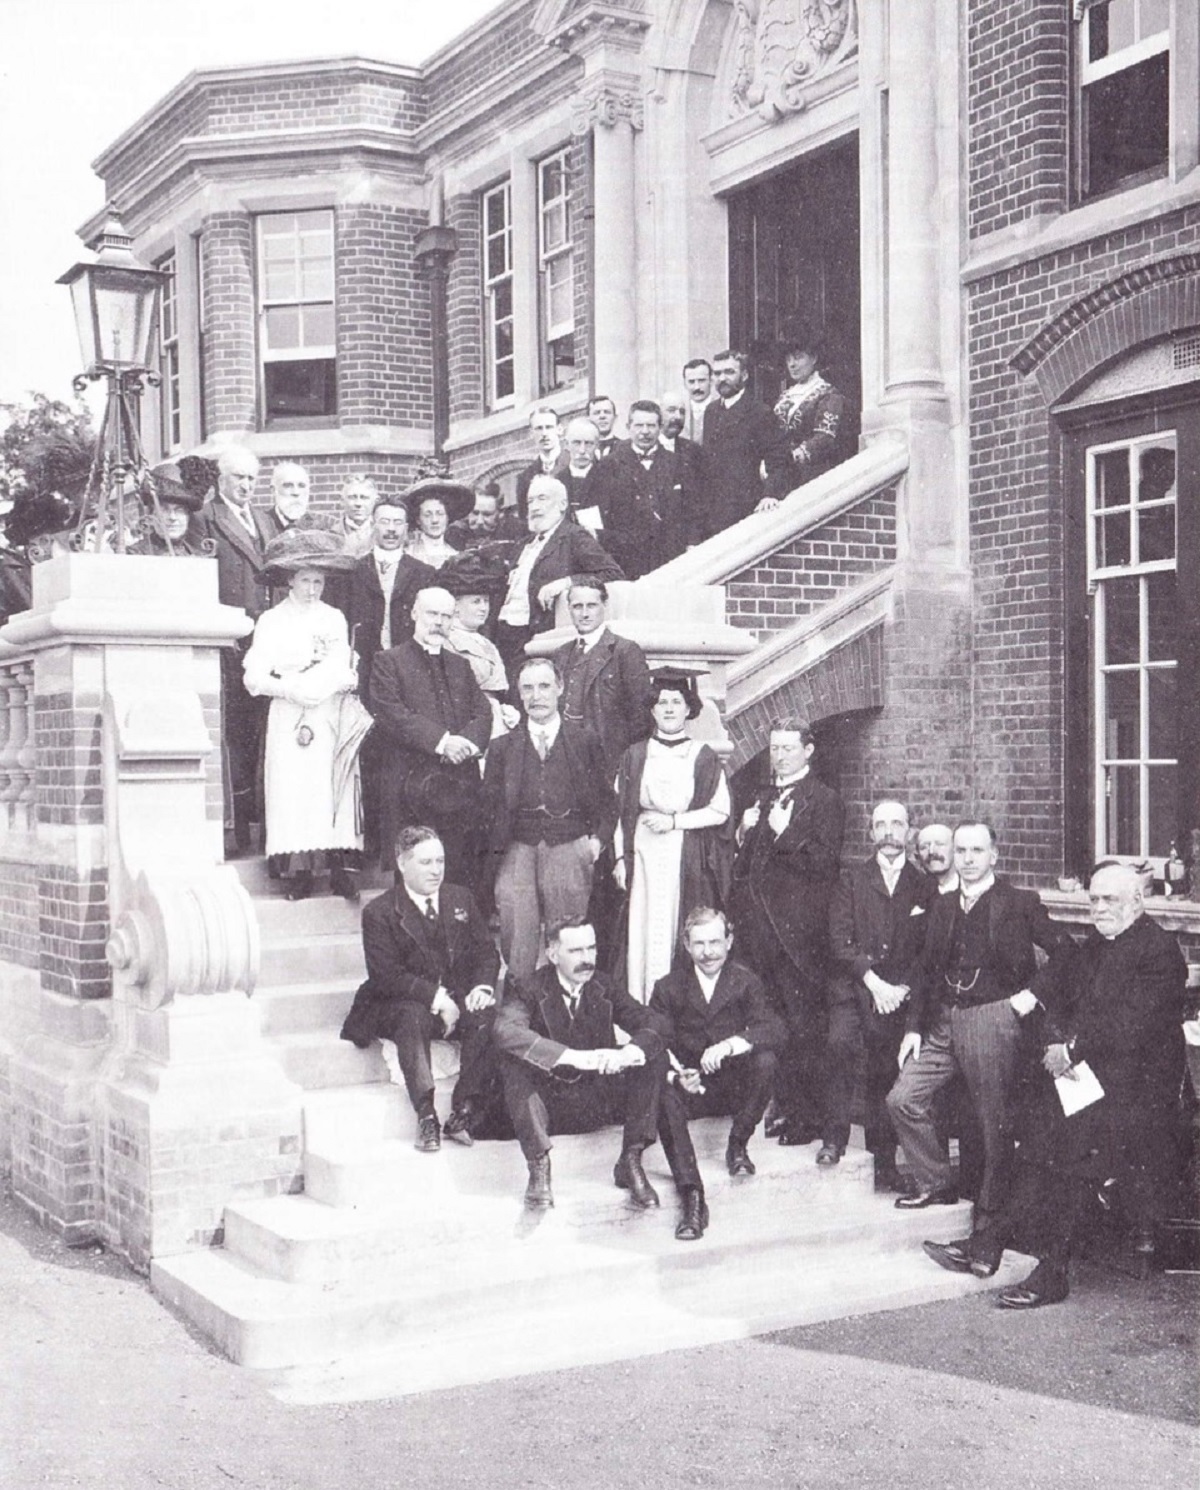 Back to the start - staff at the opening of the school building in 1912